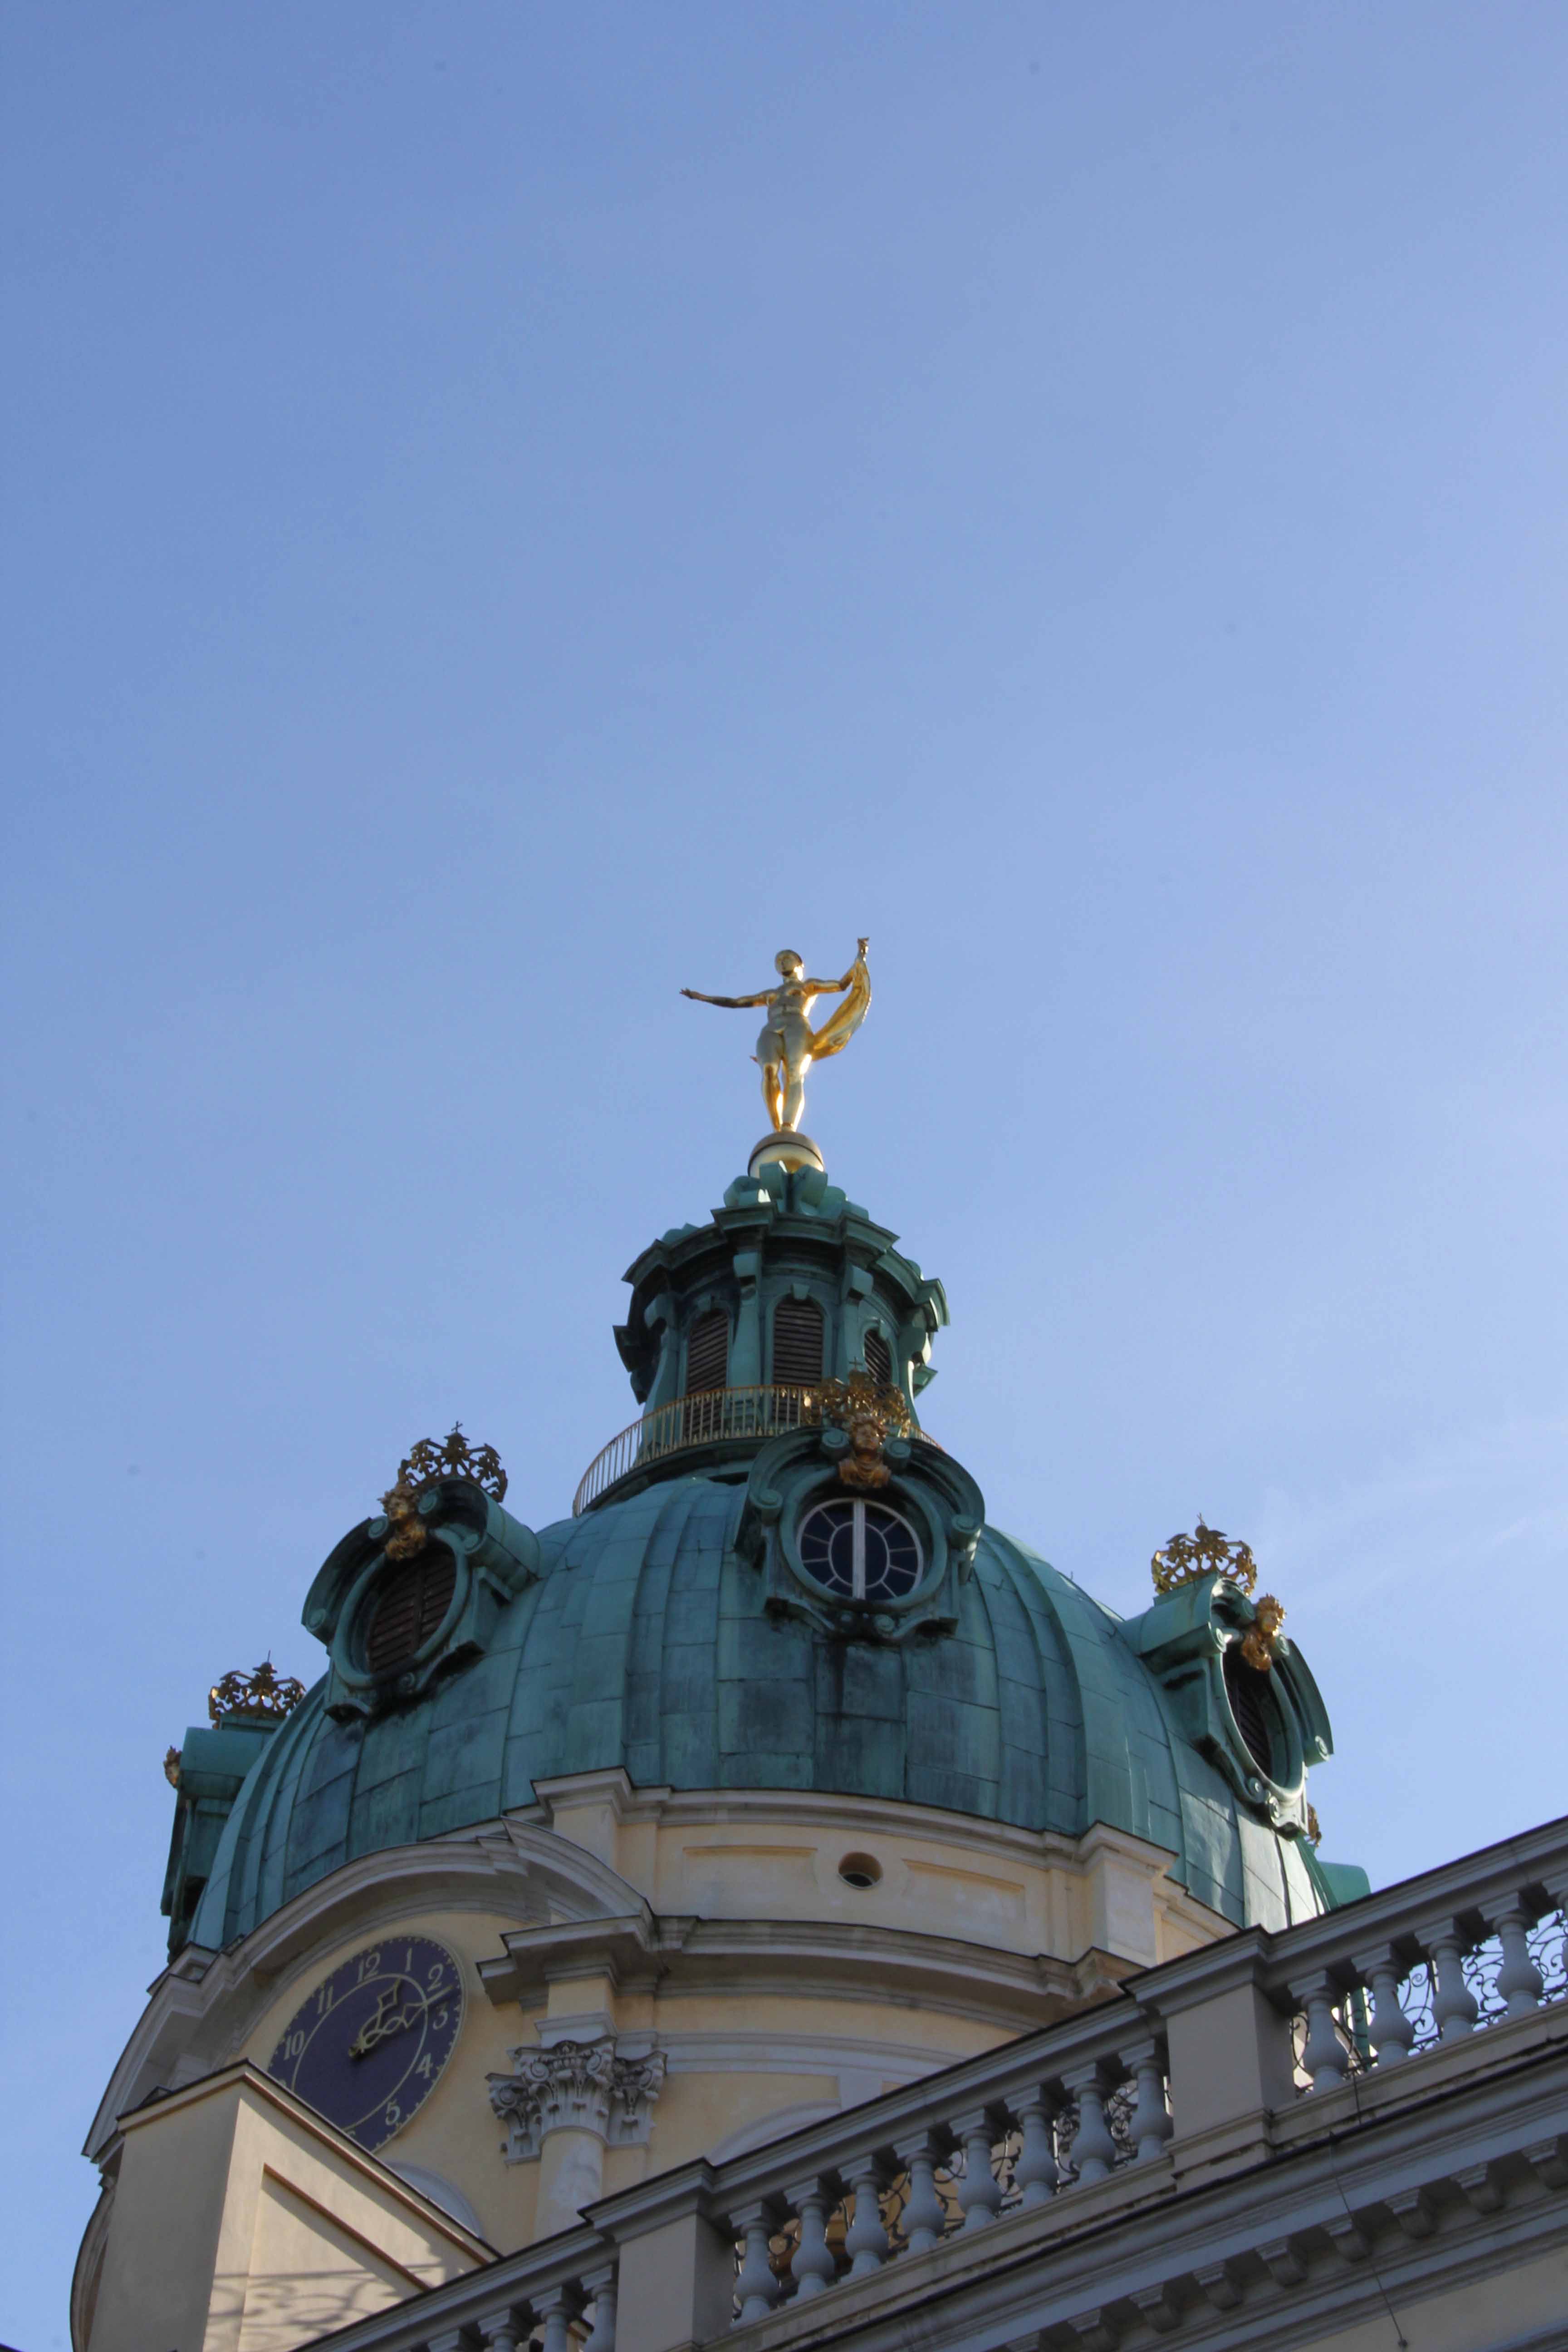 The Cupola at Schloss Charlottenburg in Berlin seen from The Palace Gardens